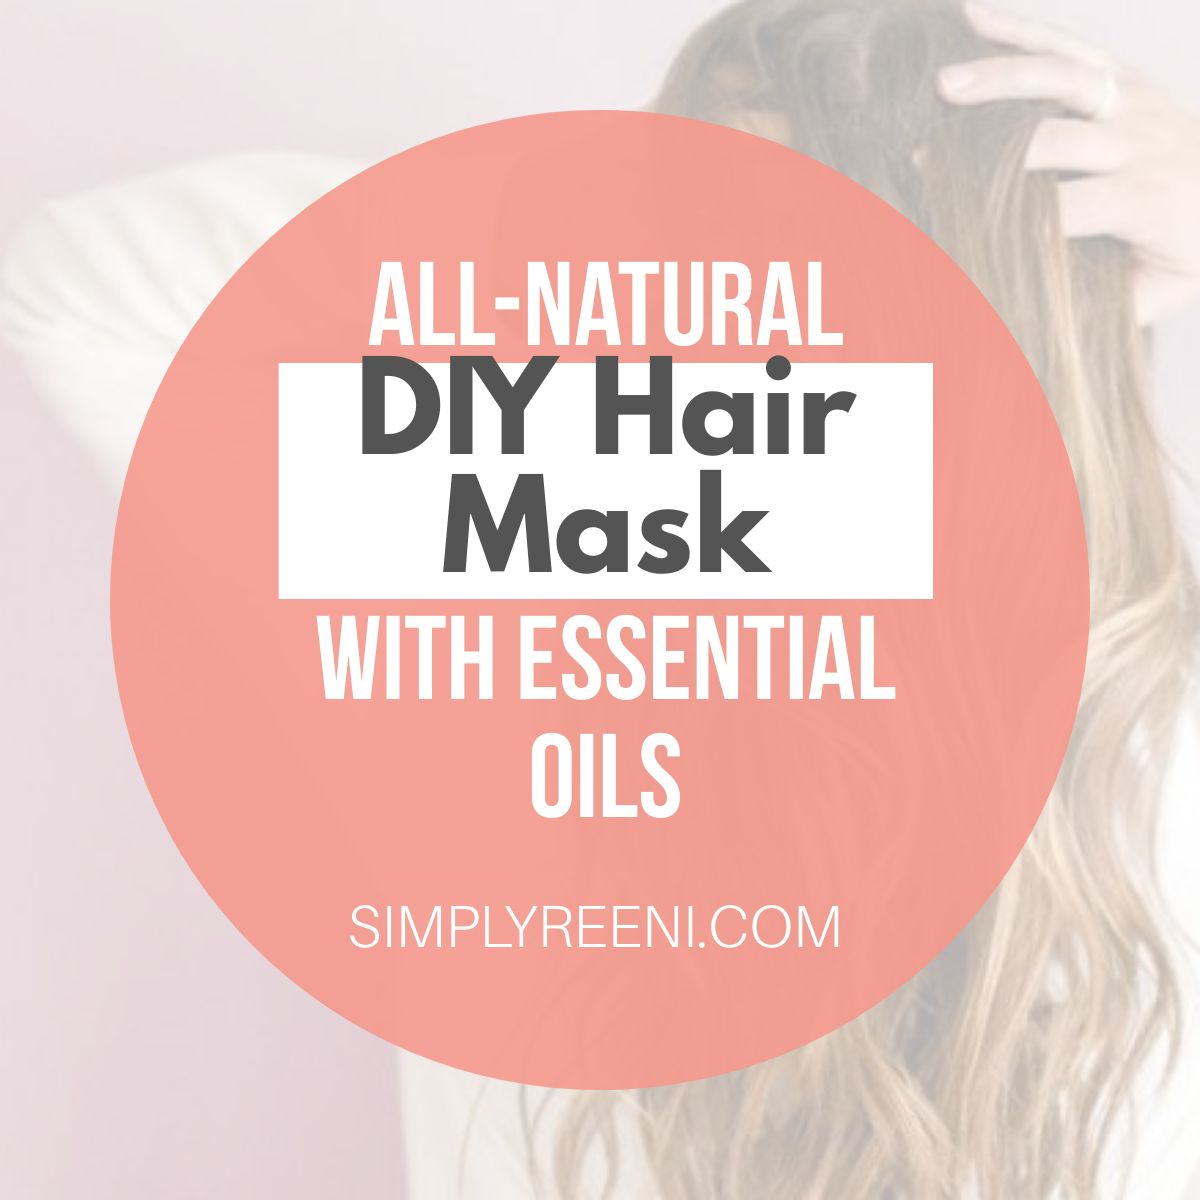 All-Natural DIY Hair Mask with Essential Oils